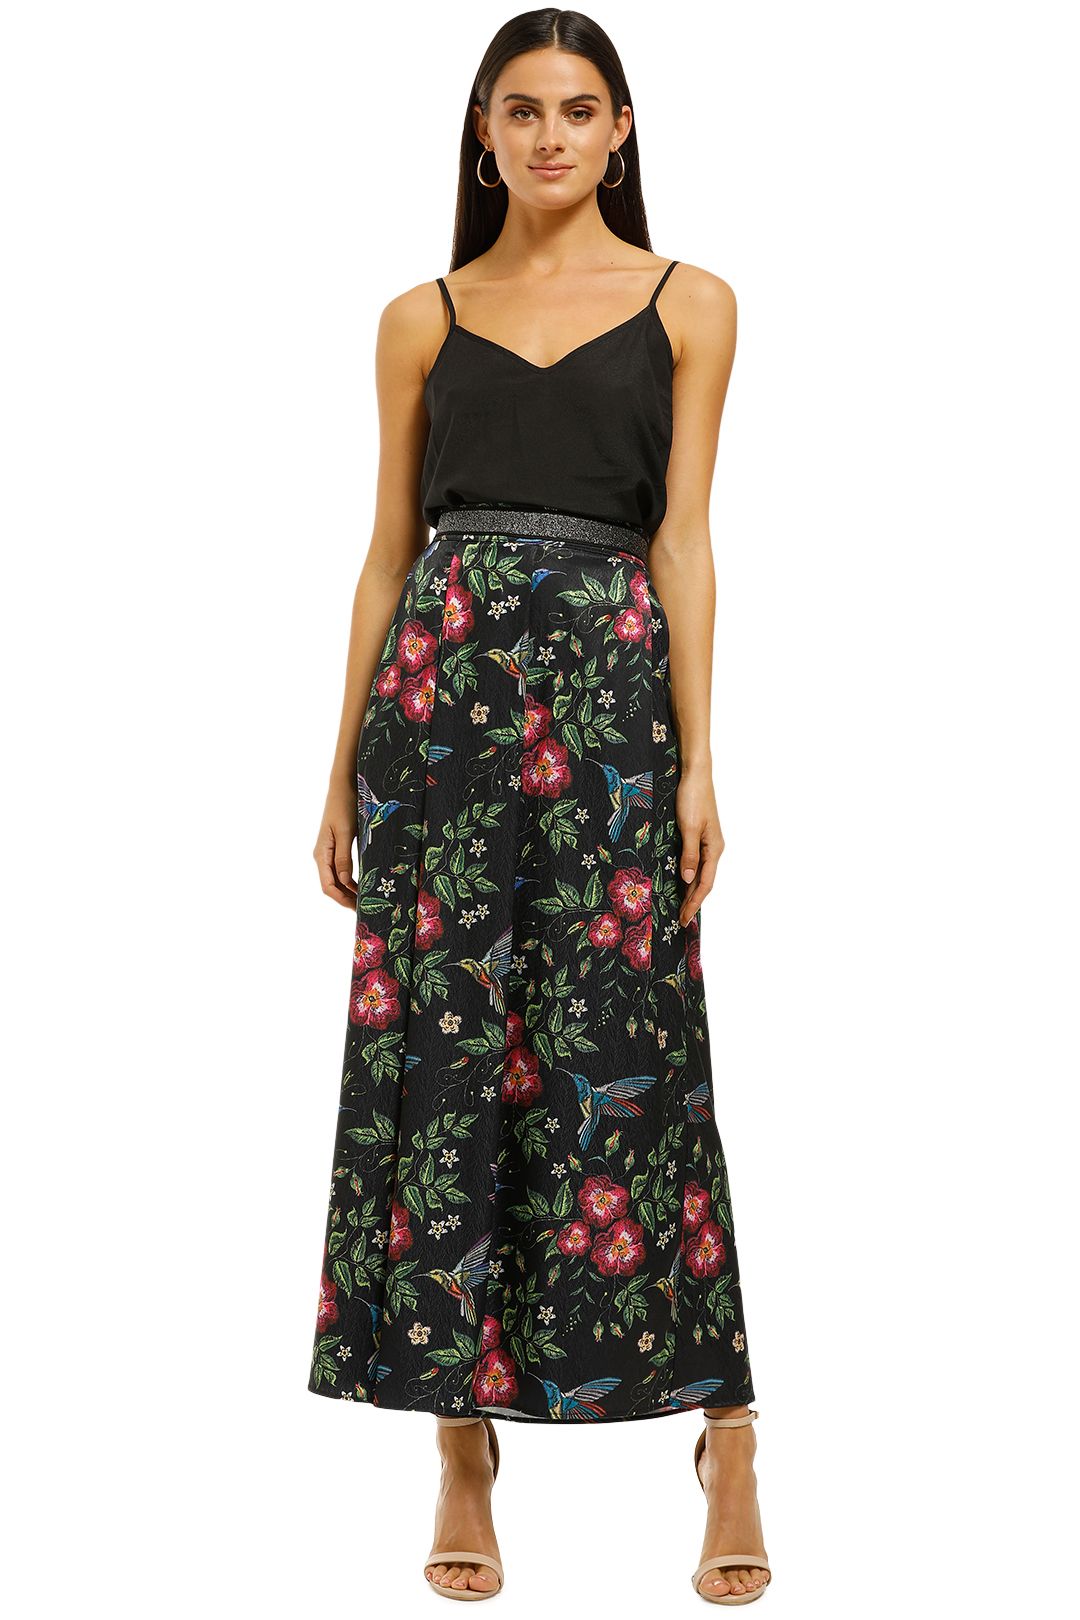 Curate-by-Trelise-Cooper-Not-For-Feather-Pant-Black-Floral-Front